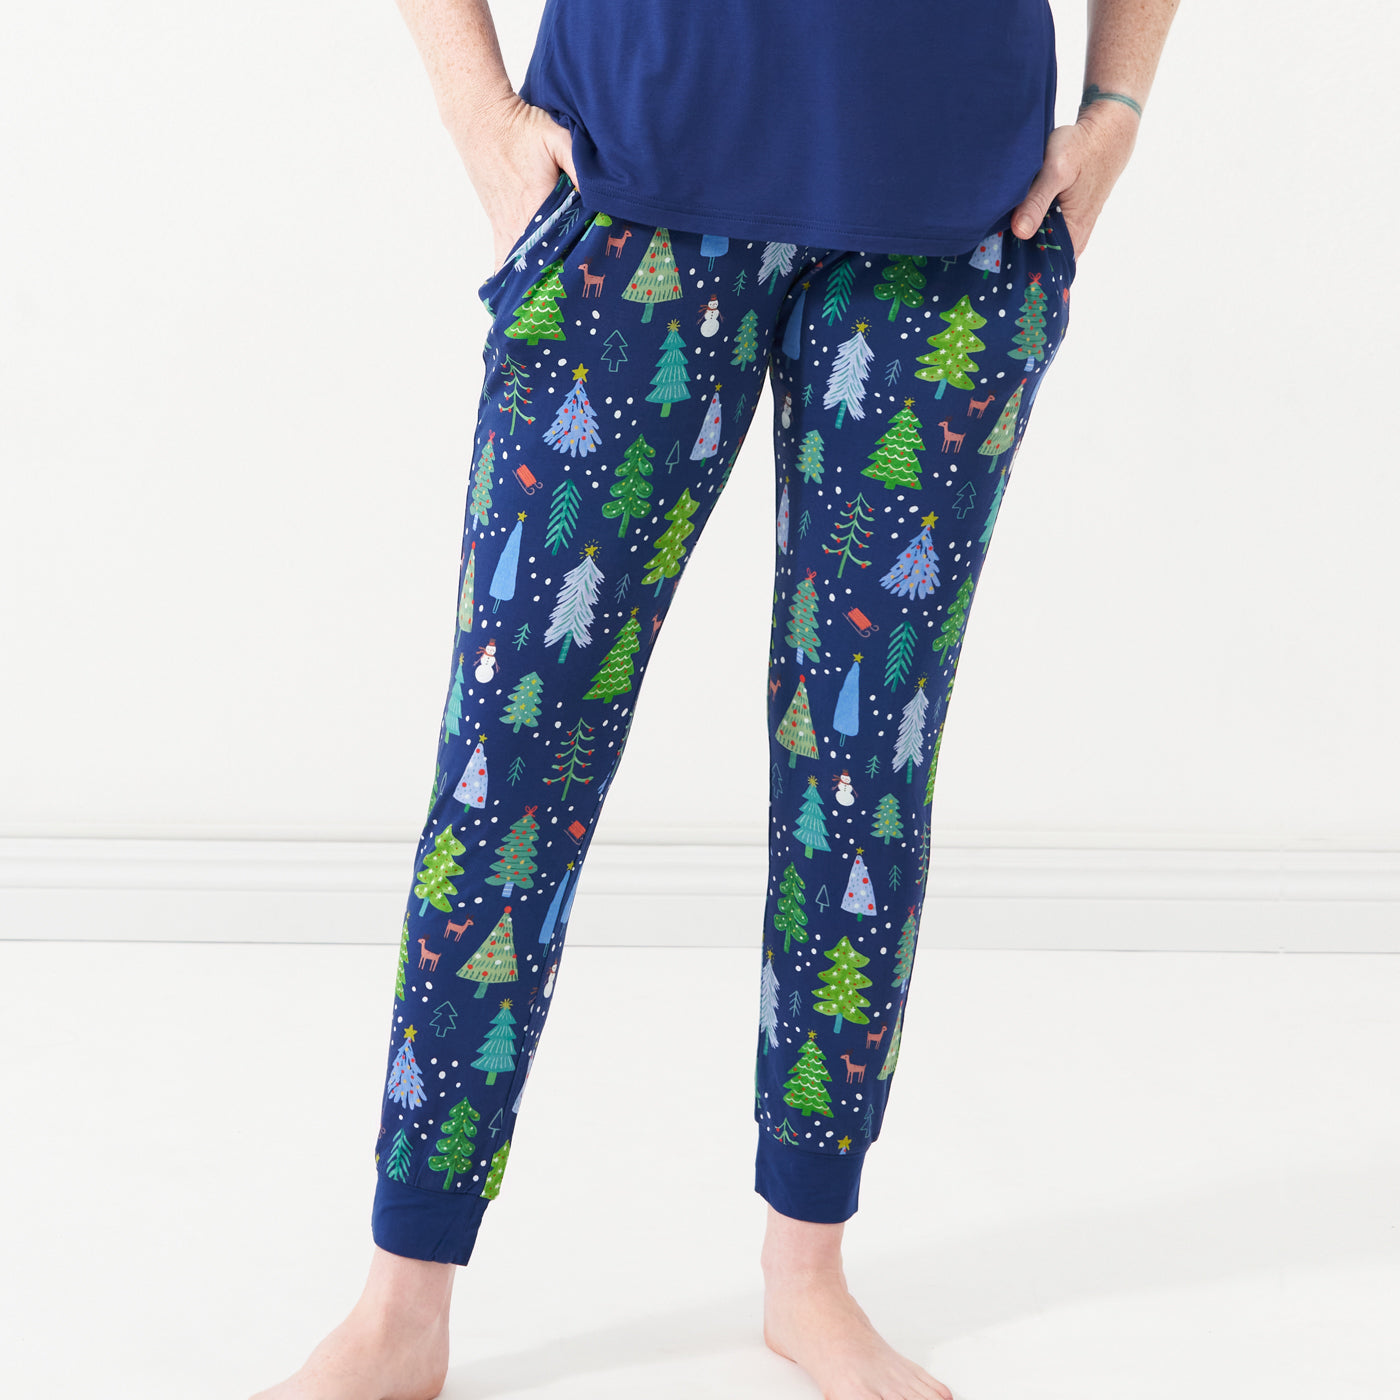 Woman posing with her hands in her pockets wearing Blue Merry and Bright women's pajama bottoms